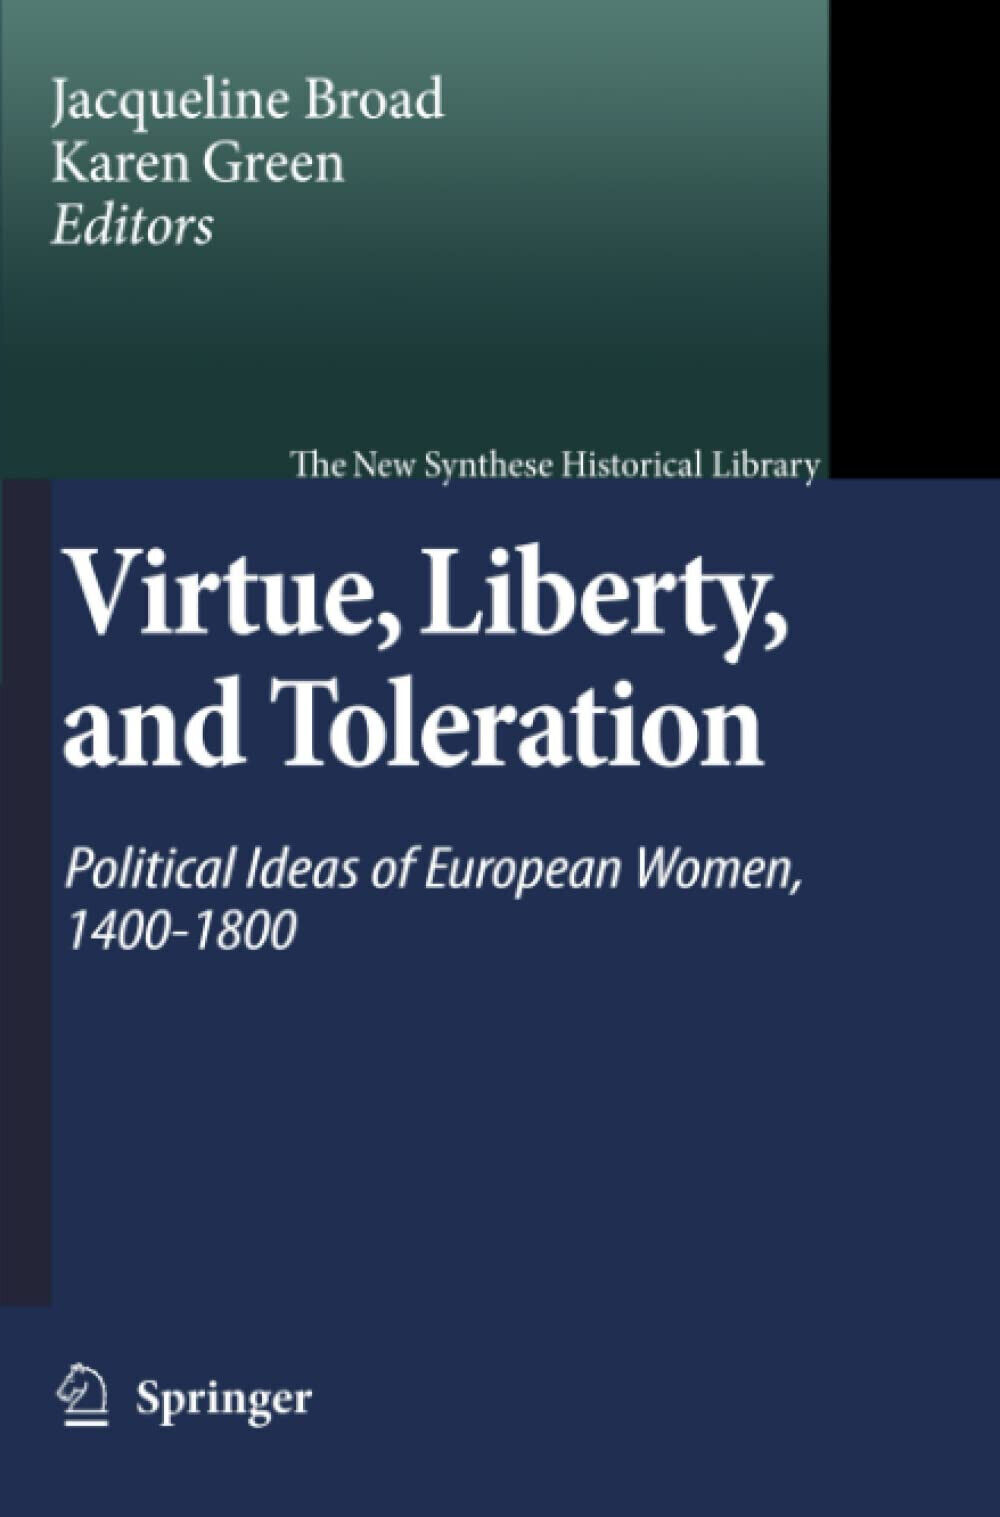 Virtue, Liberty, and Toleration - Jacqueline Broad - Springer, 2010